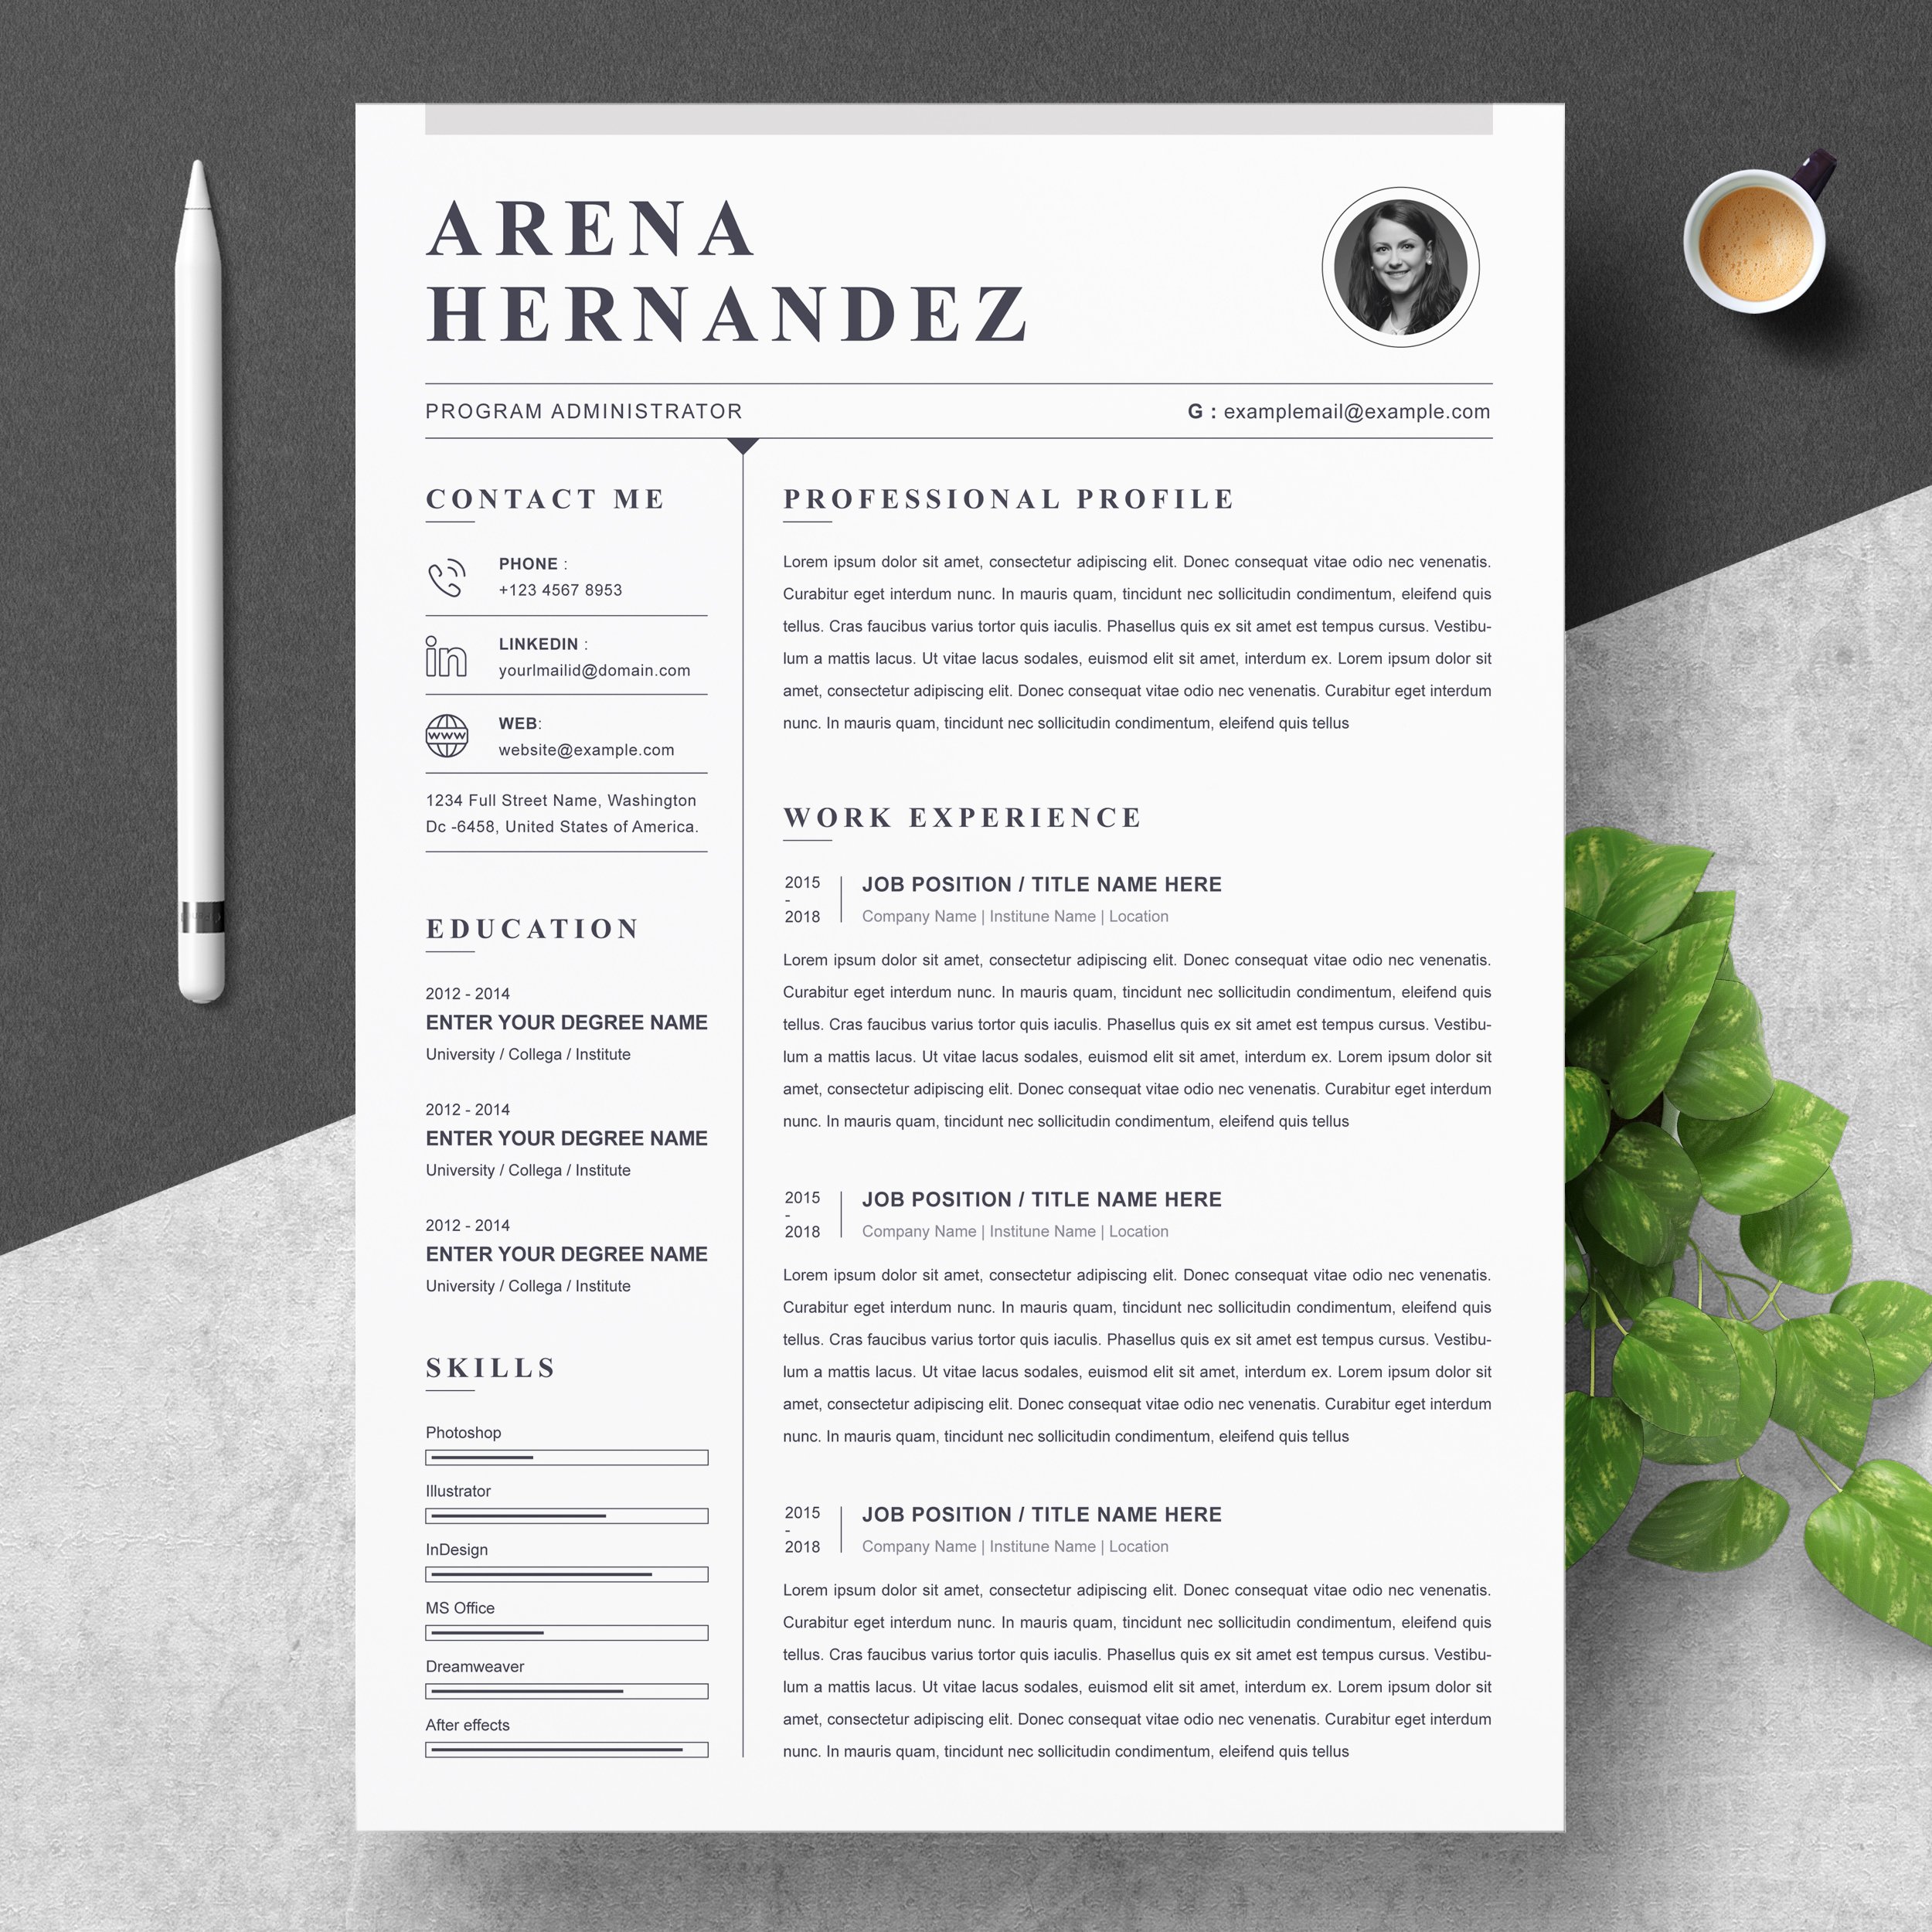 Professional Resume Template 2021 cover image.